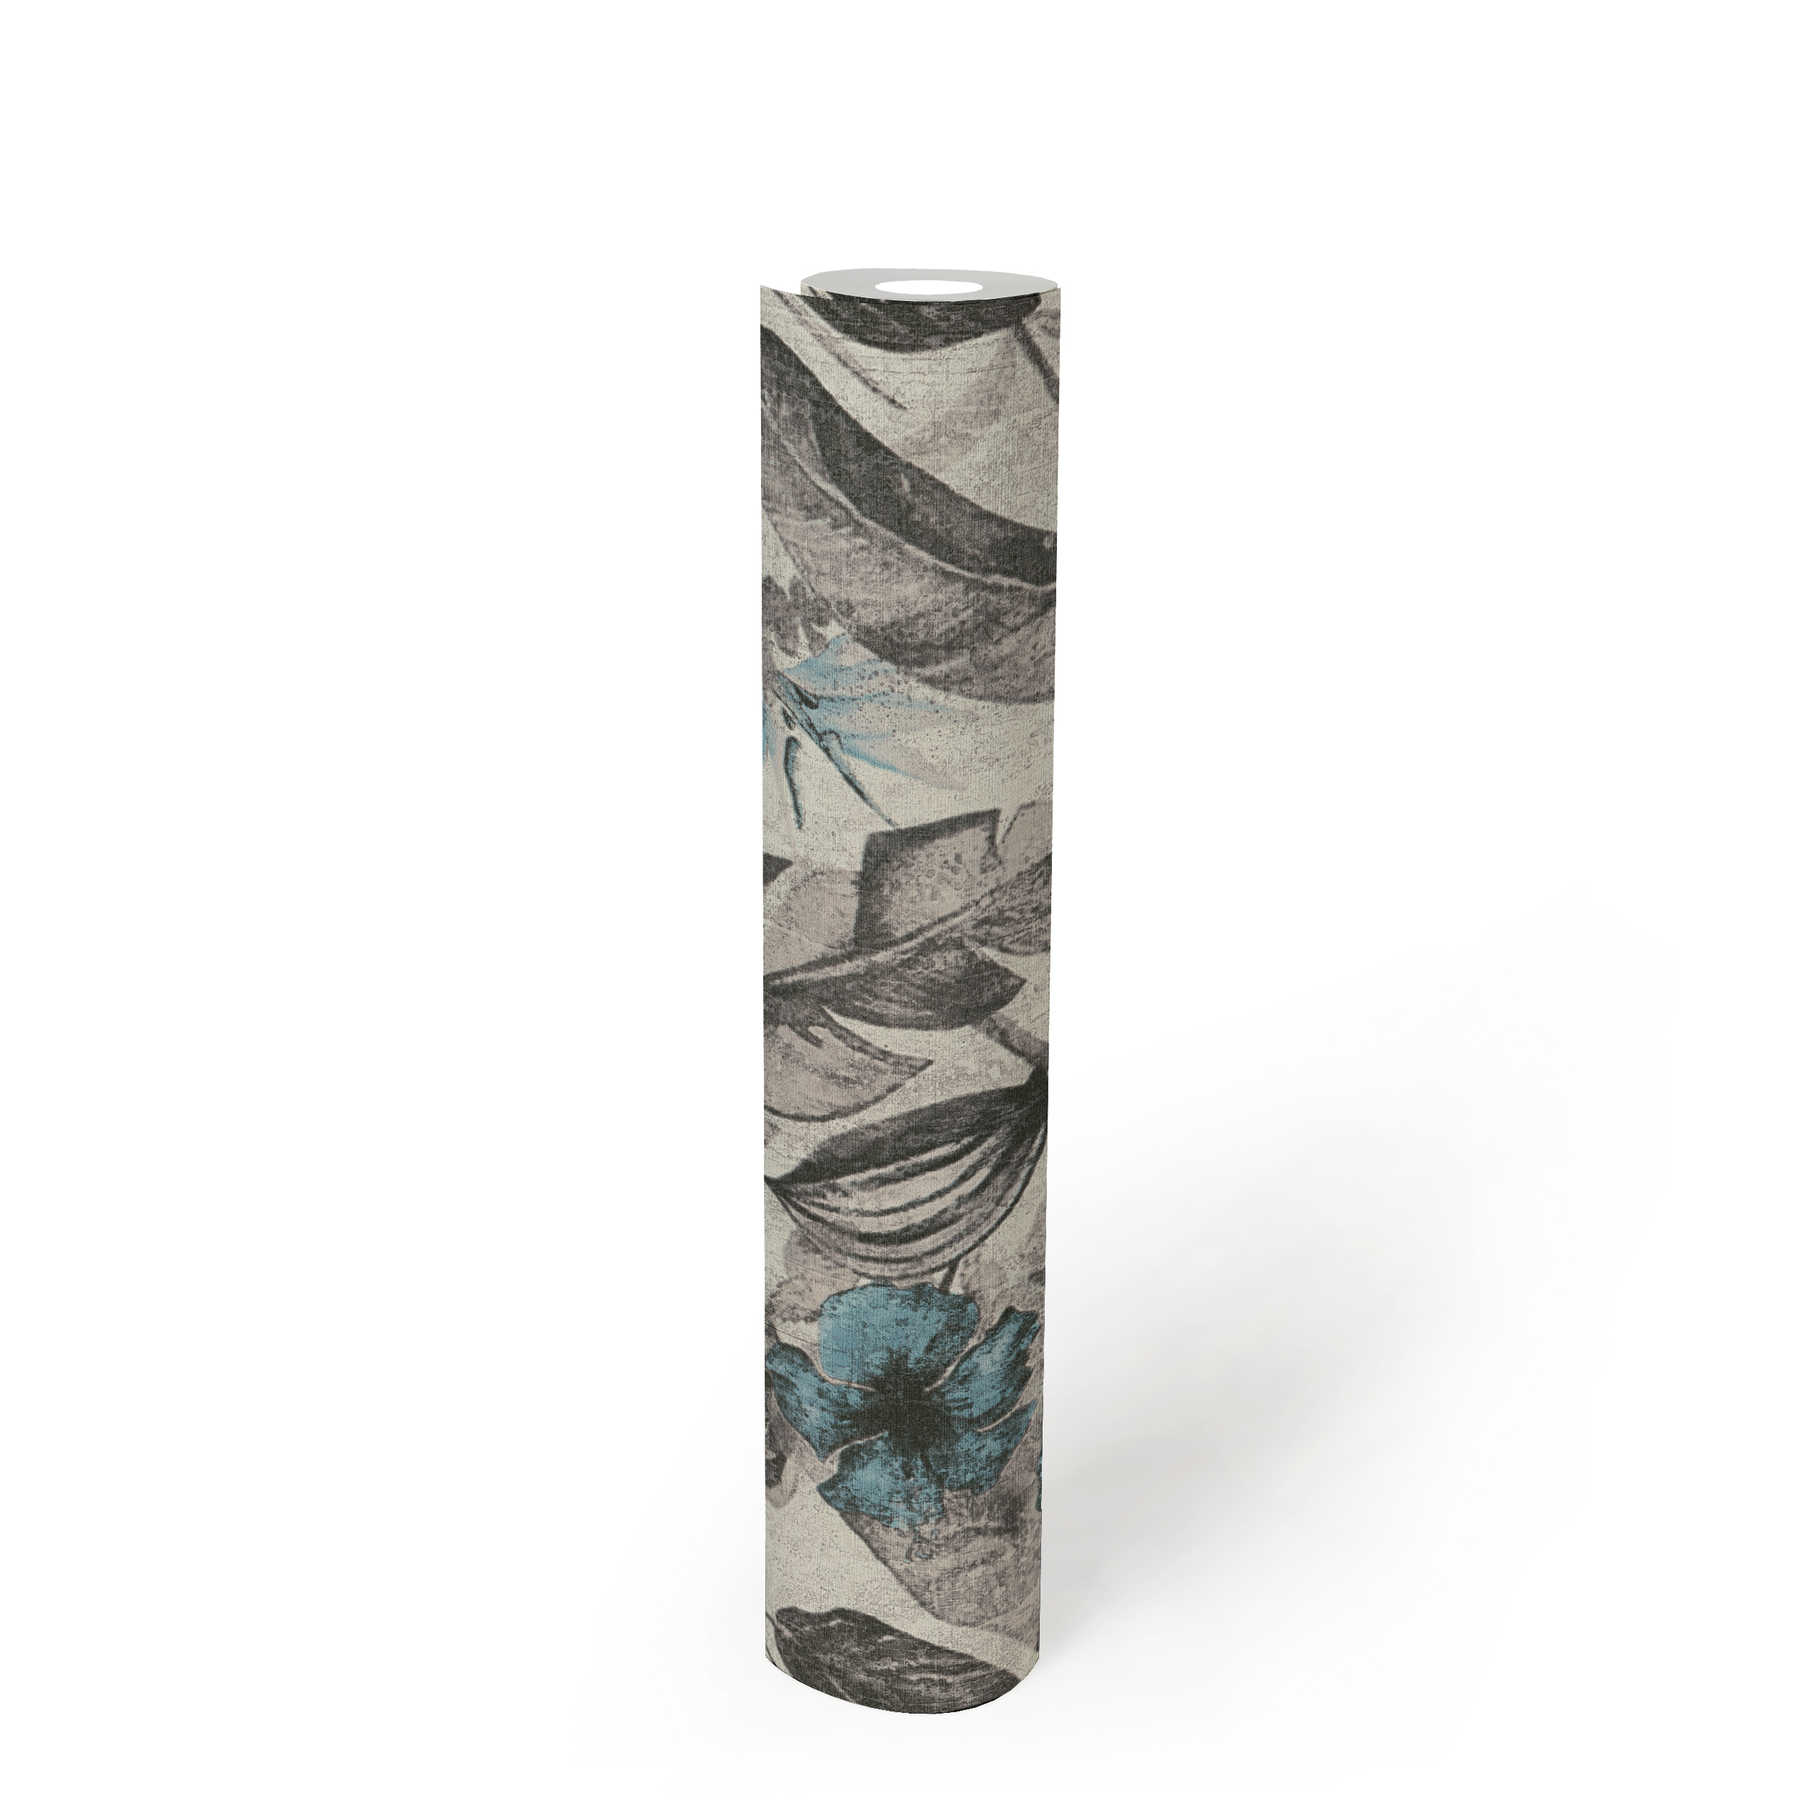             Wallpaper tropical floral pattern in textile look - blue, grey, black
        